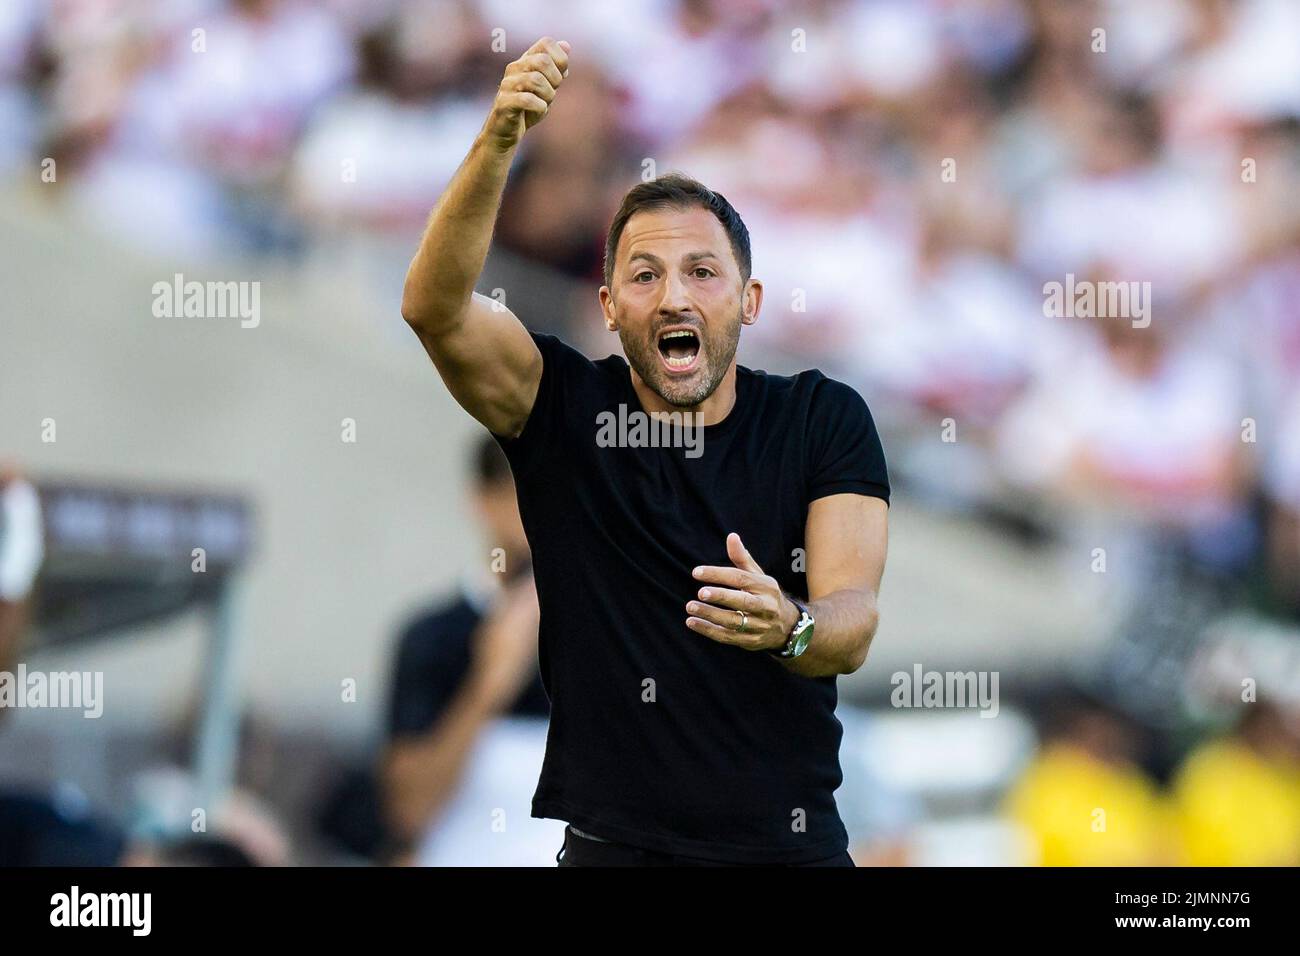 07 August 2022, Baden-Wuerttemberg, Stuttgart: Soccer: Bundesliga, VfB Stuttgart - RB Leipzig, Matchday 1, Mercedes-Benz Arena. Leipzig coach Domenico Tedesco gestures. Photo: Tom Weller/dpa - IMPORTANT NOTE: In accordance with the requirements of the DFL Deutsche Fußball Liga and the DFB Deutscher Fußball-Bund, it is prohibited to use or have used photographs taken in the stadium and/or of the match in the form of sequence pictures and/or video-like photo series. Stock Photo